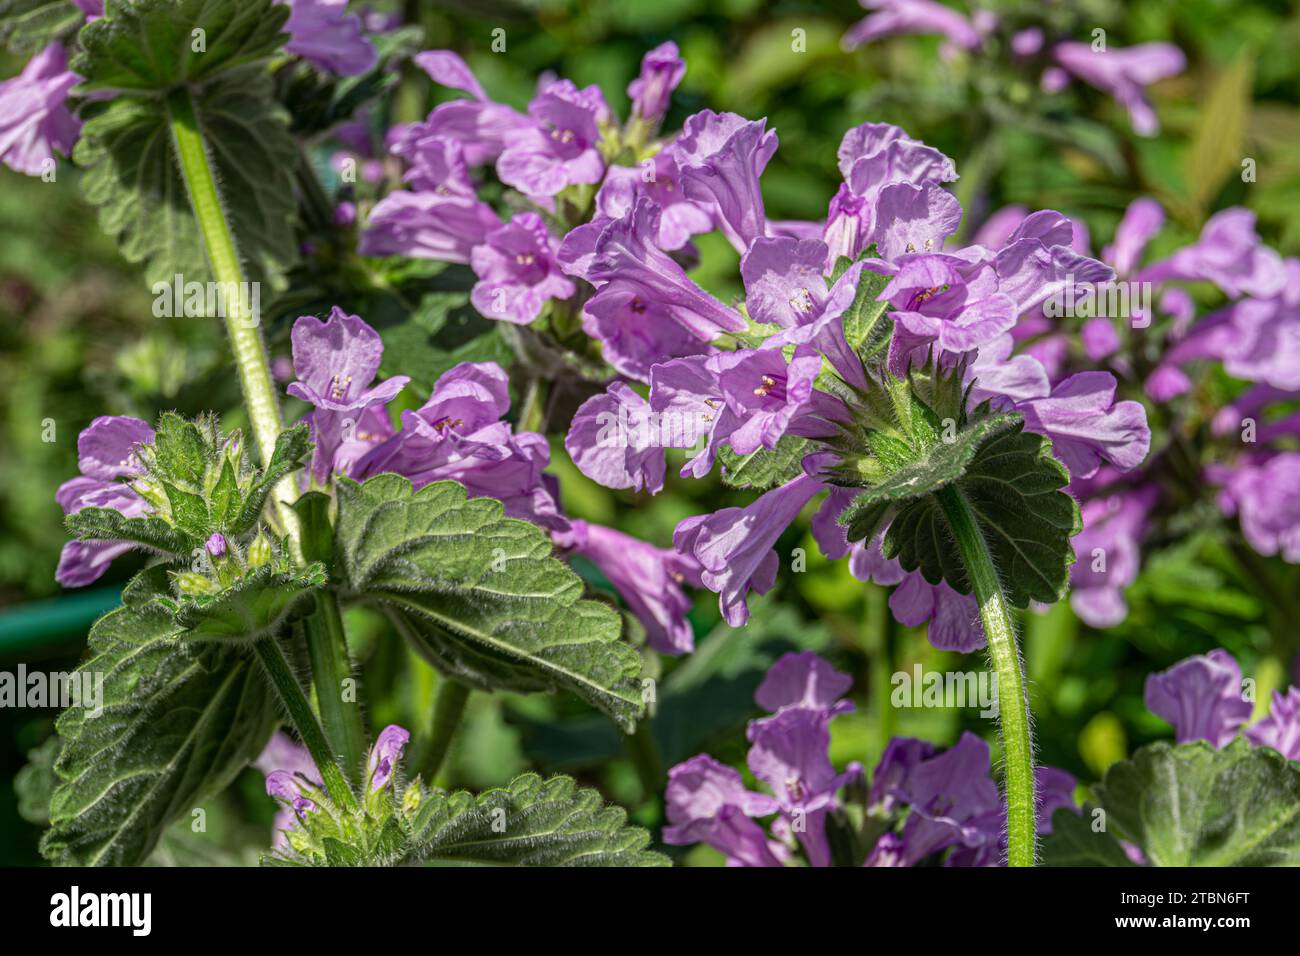 Blooming Betonica officinális purple flowers in the garden. Stock Photo